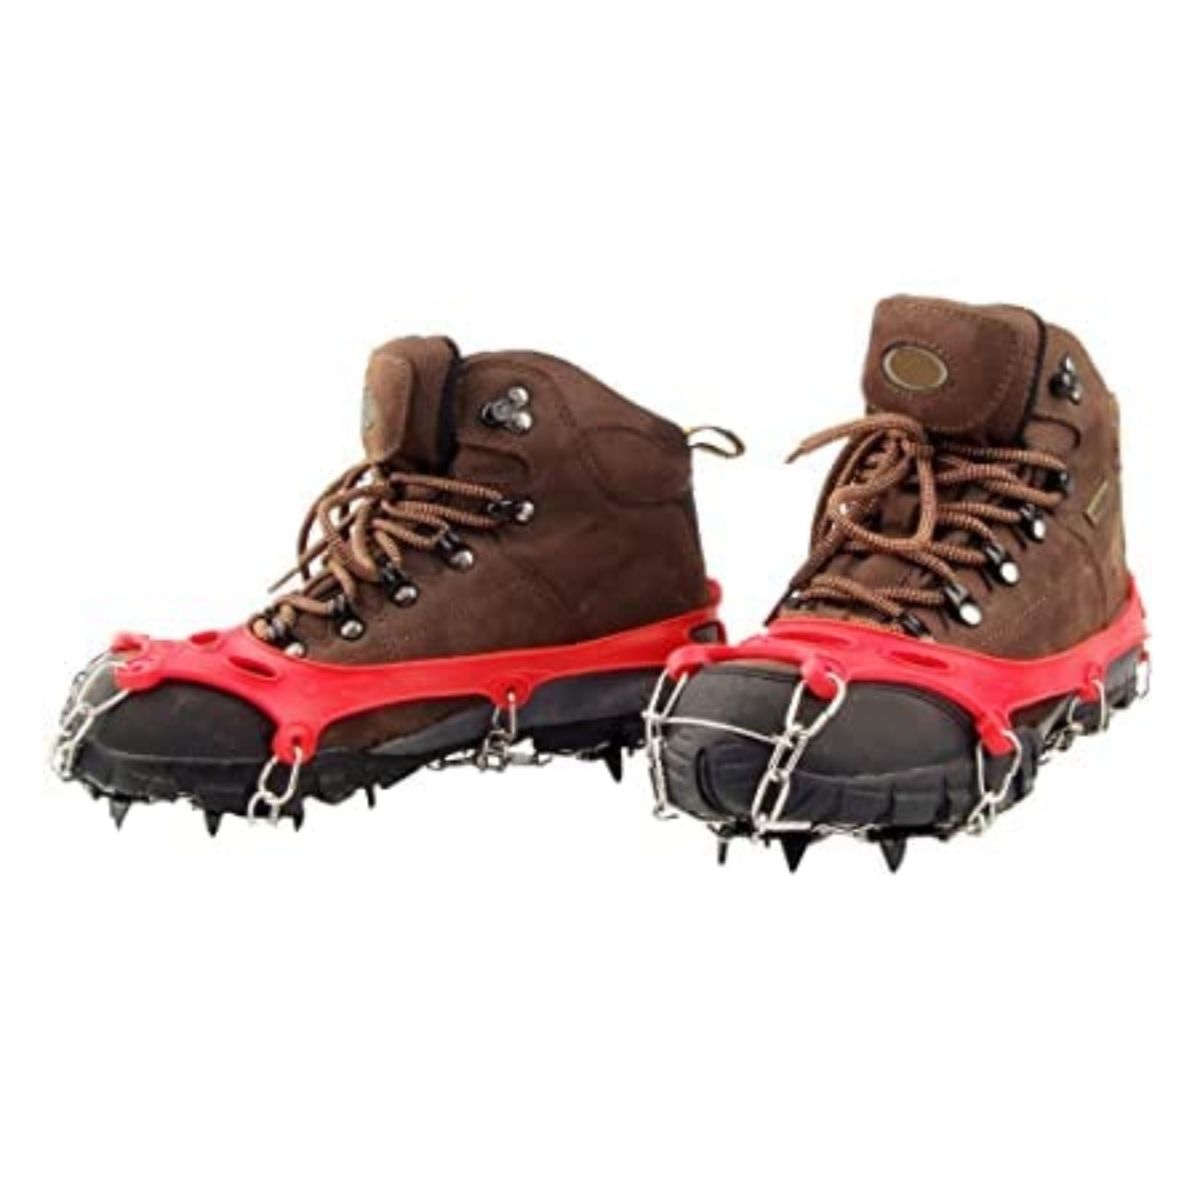 Crampons for Hiking Boots 2